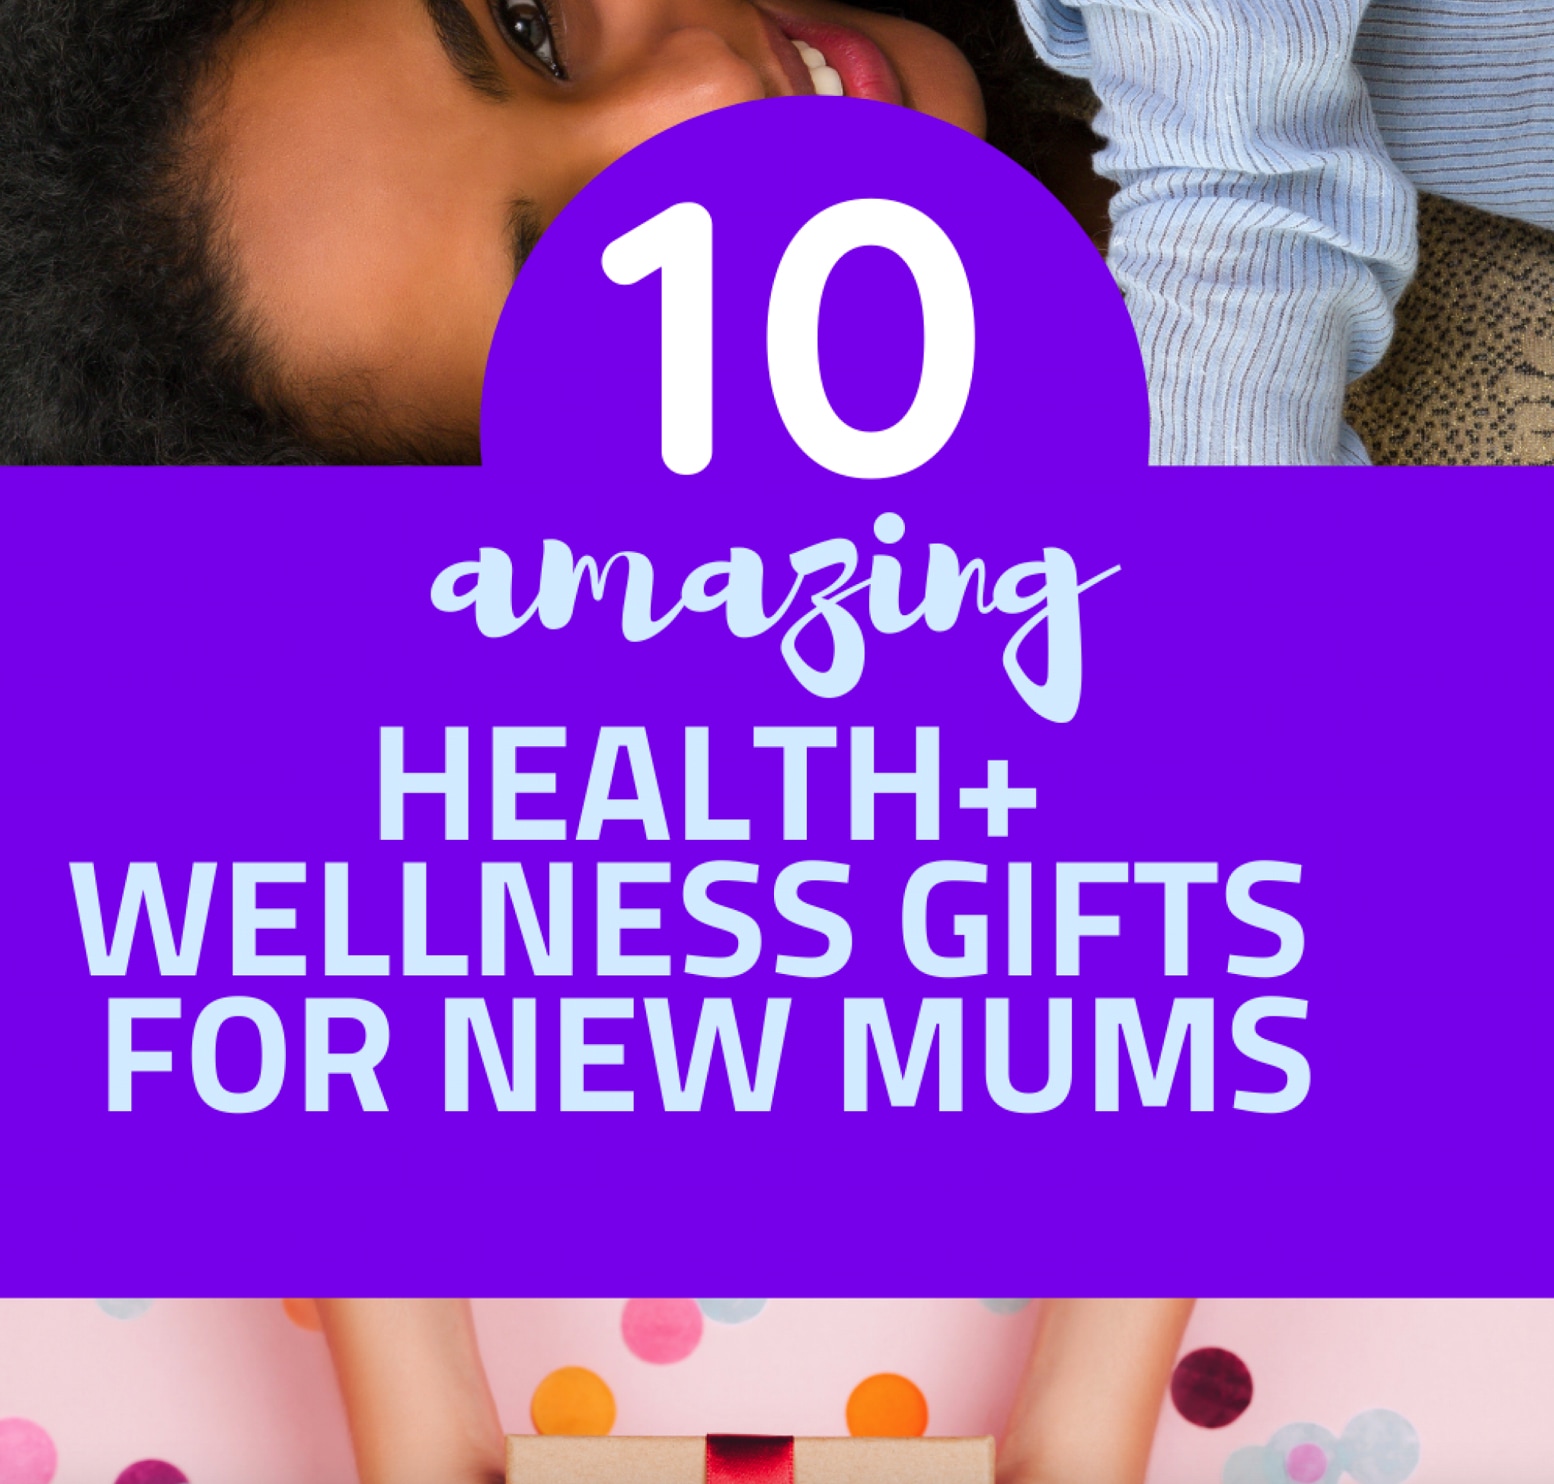 10 Health and Wellness gifts for new mums